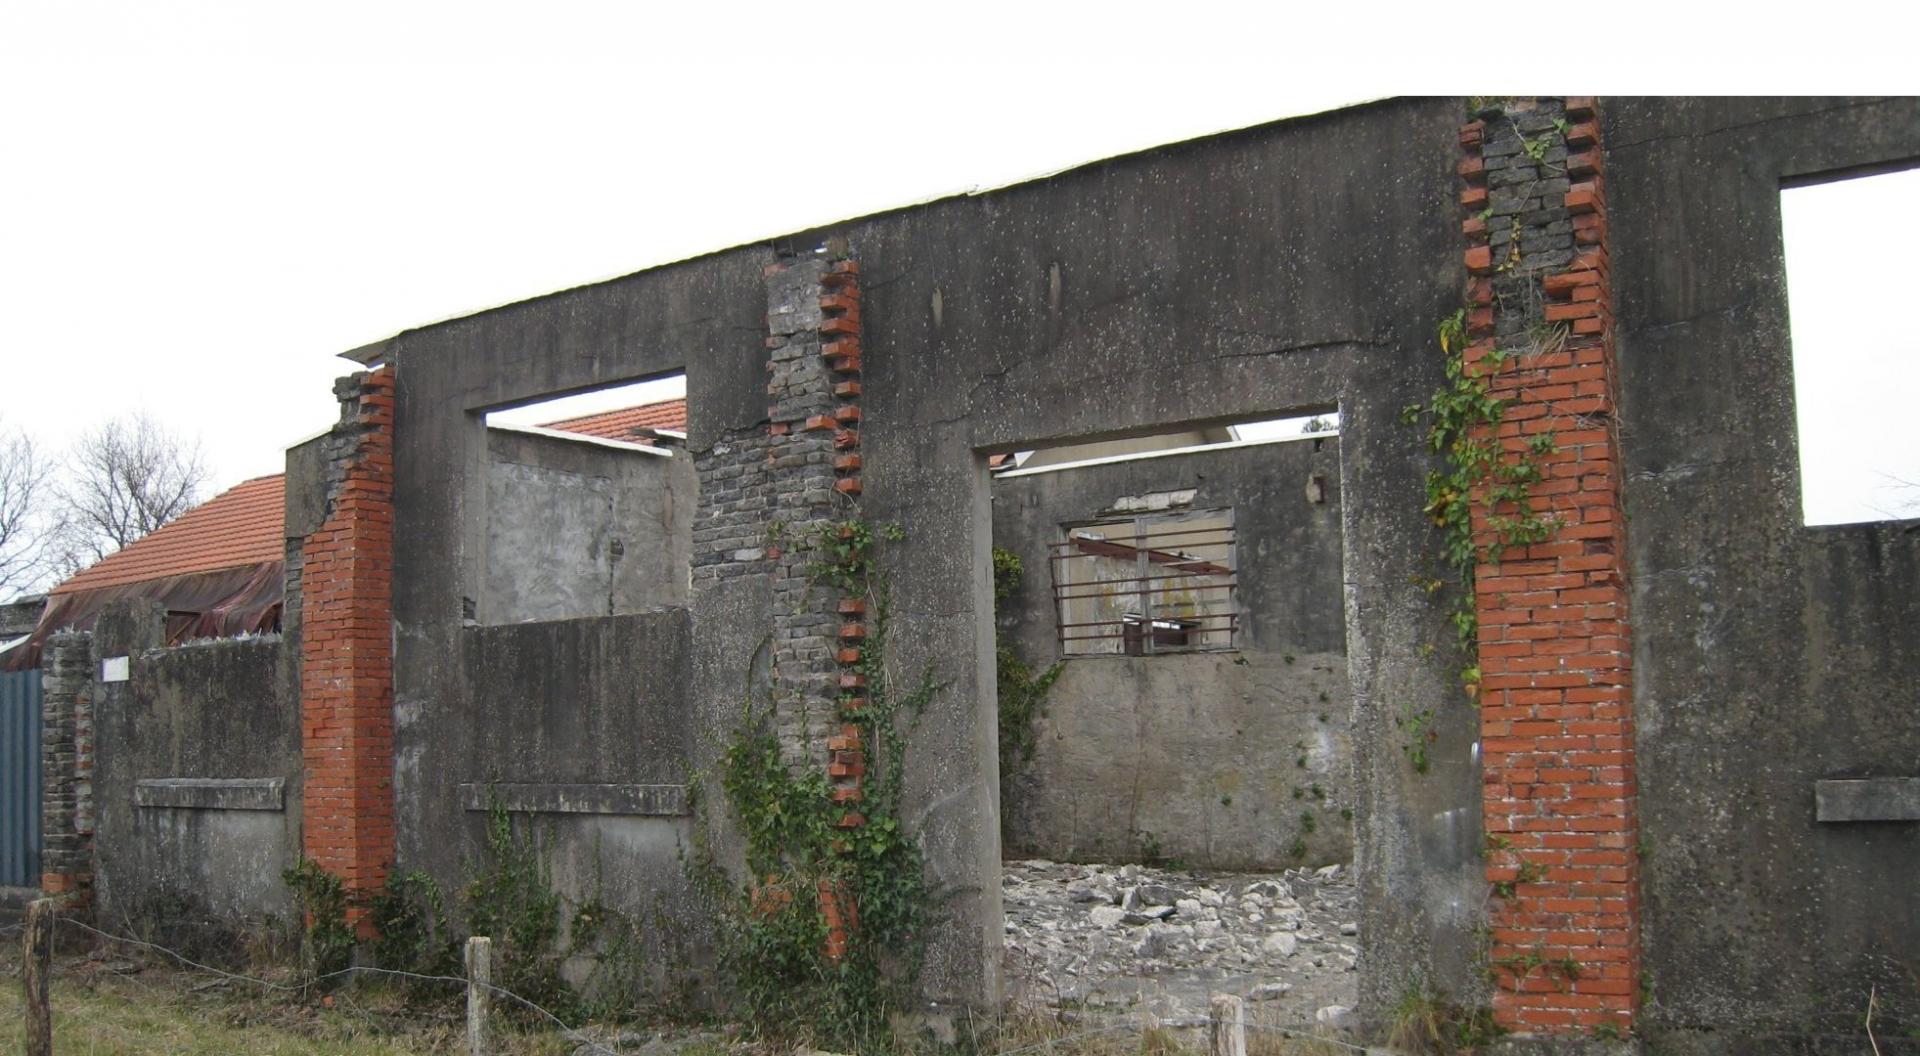 Ang ruined workshops